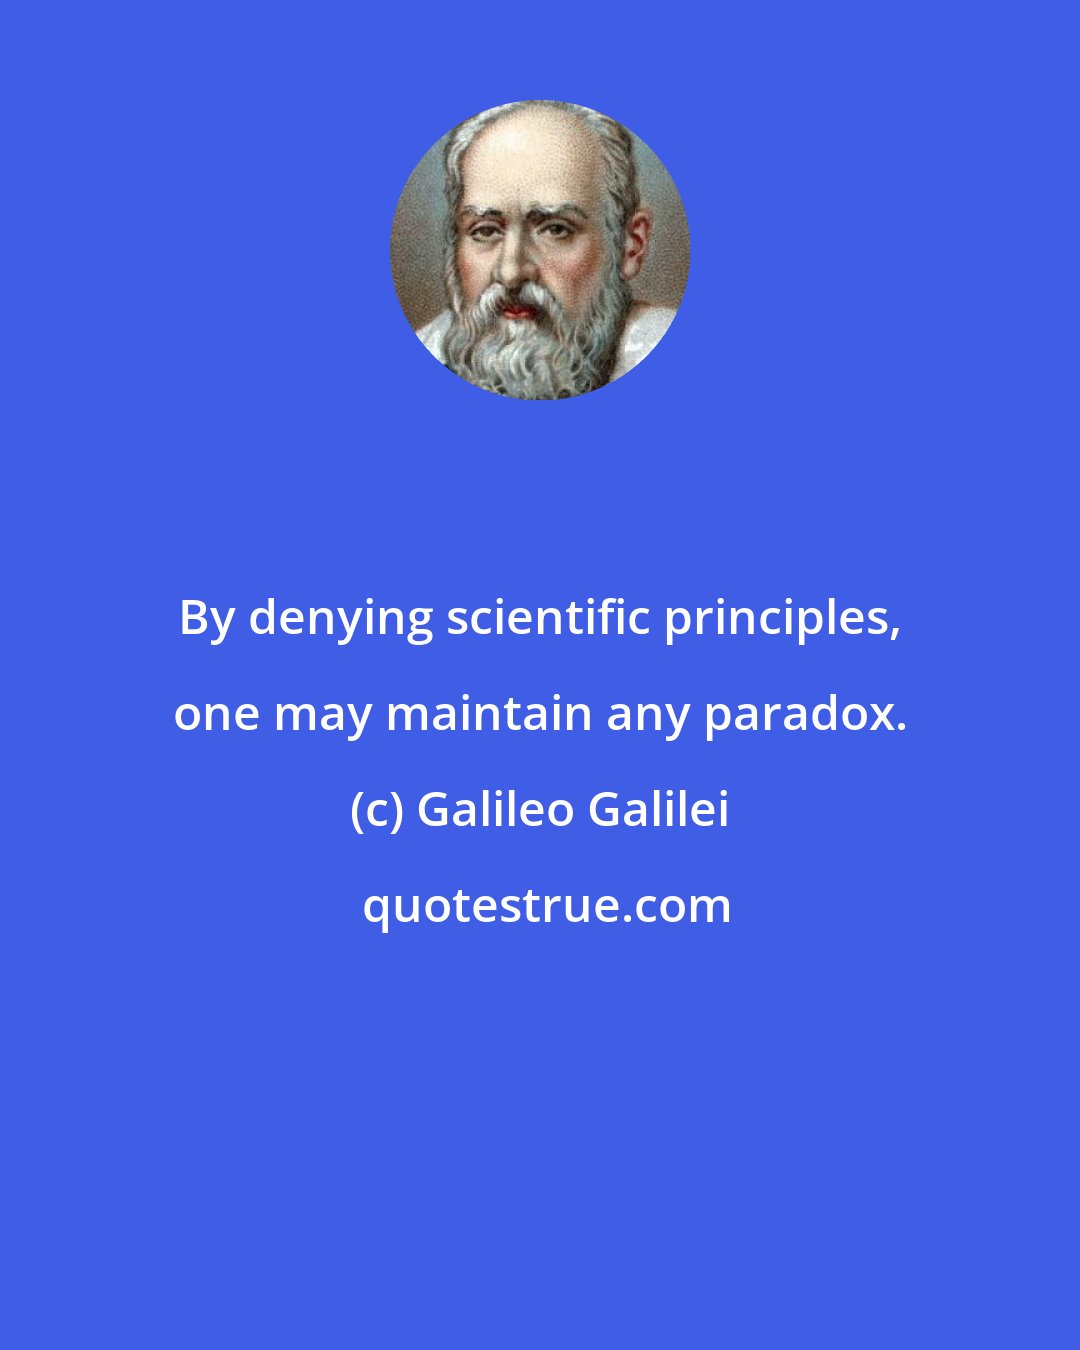 Galileo Galilei: By denying scientific principles, one may maintain any paradox.